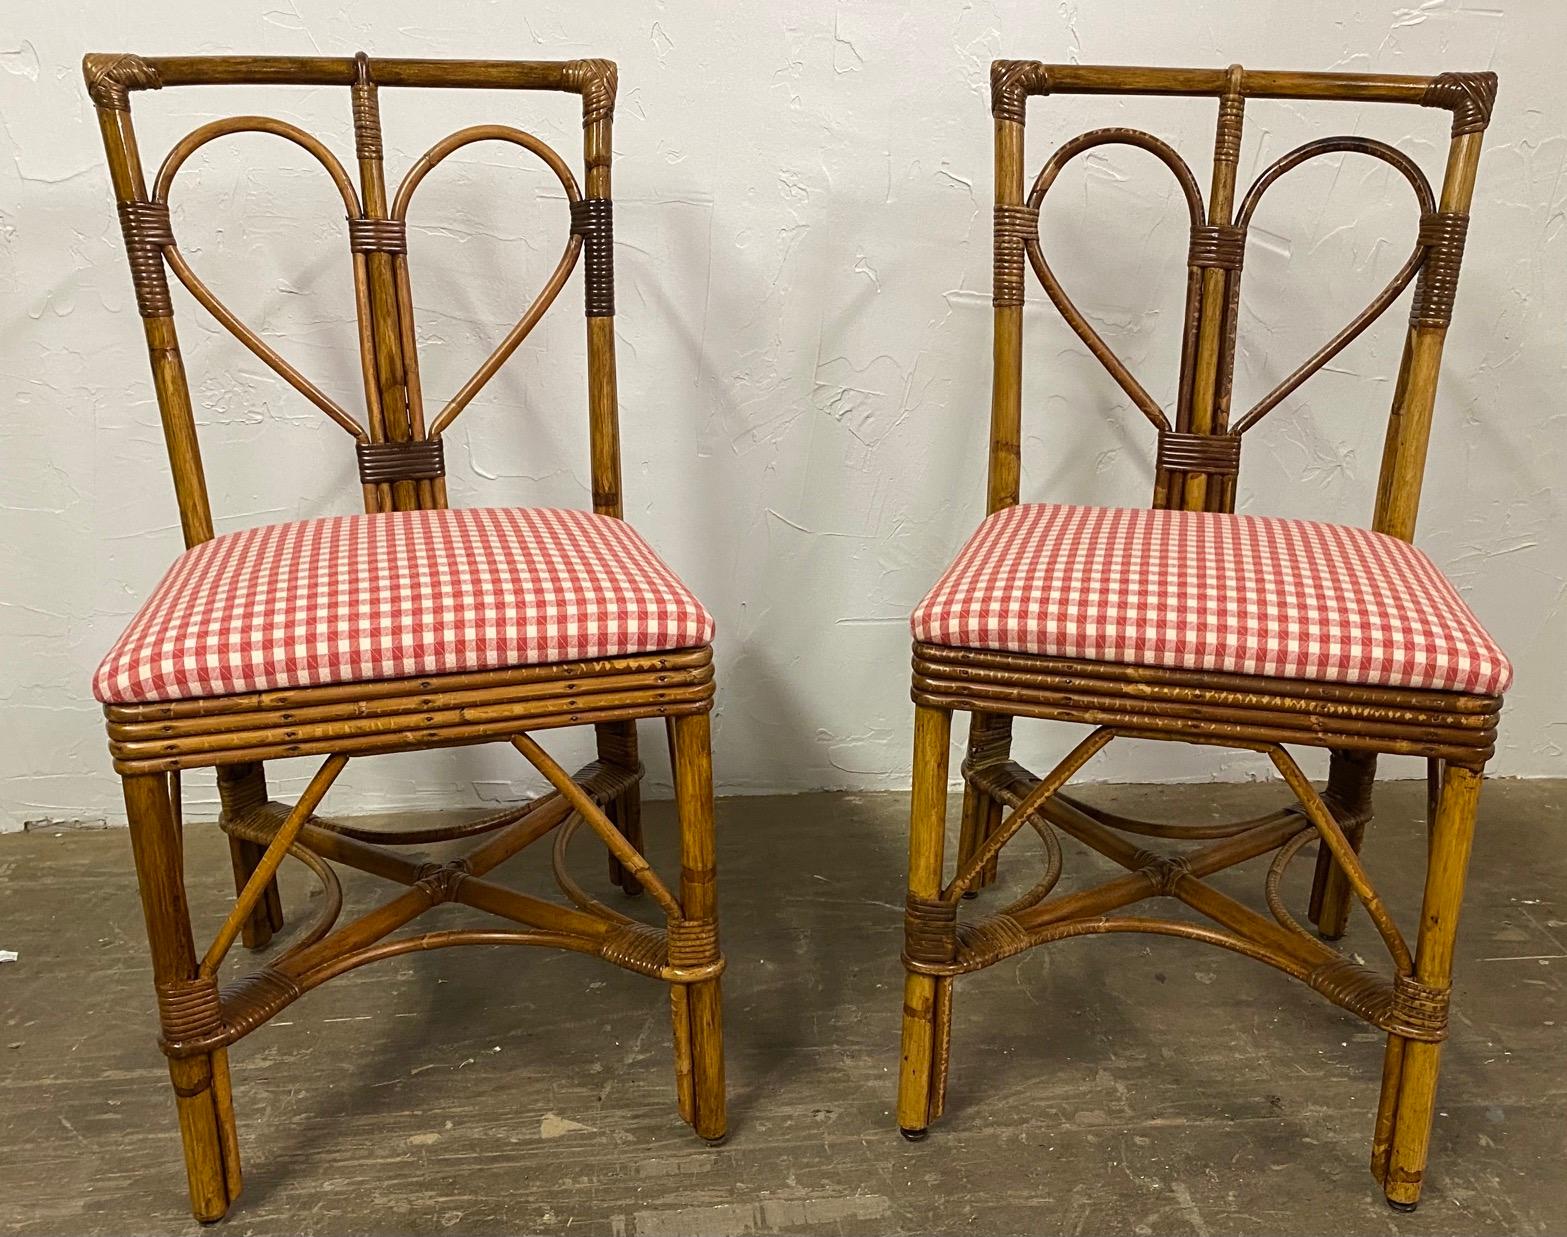 Pair of charming rattan bamboo side chairs covered red and white checkered fabric seat cushions.
Great as kitchen dining chairs or extra chairs for the porch or patio.